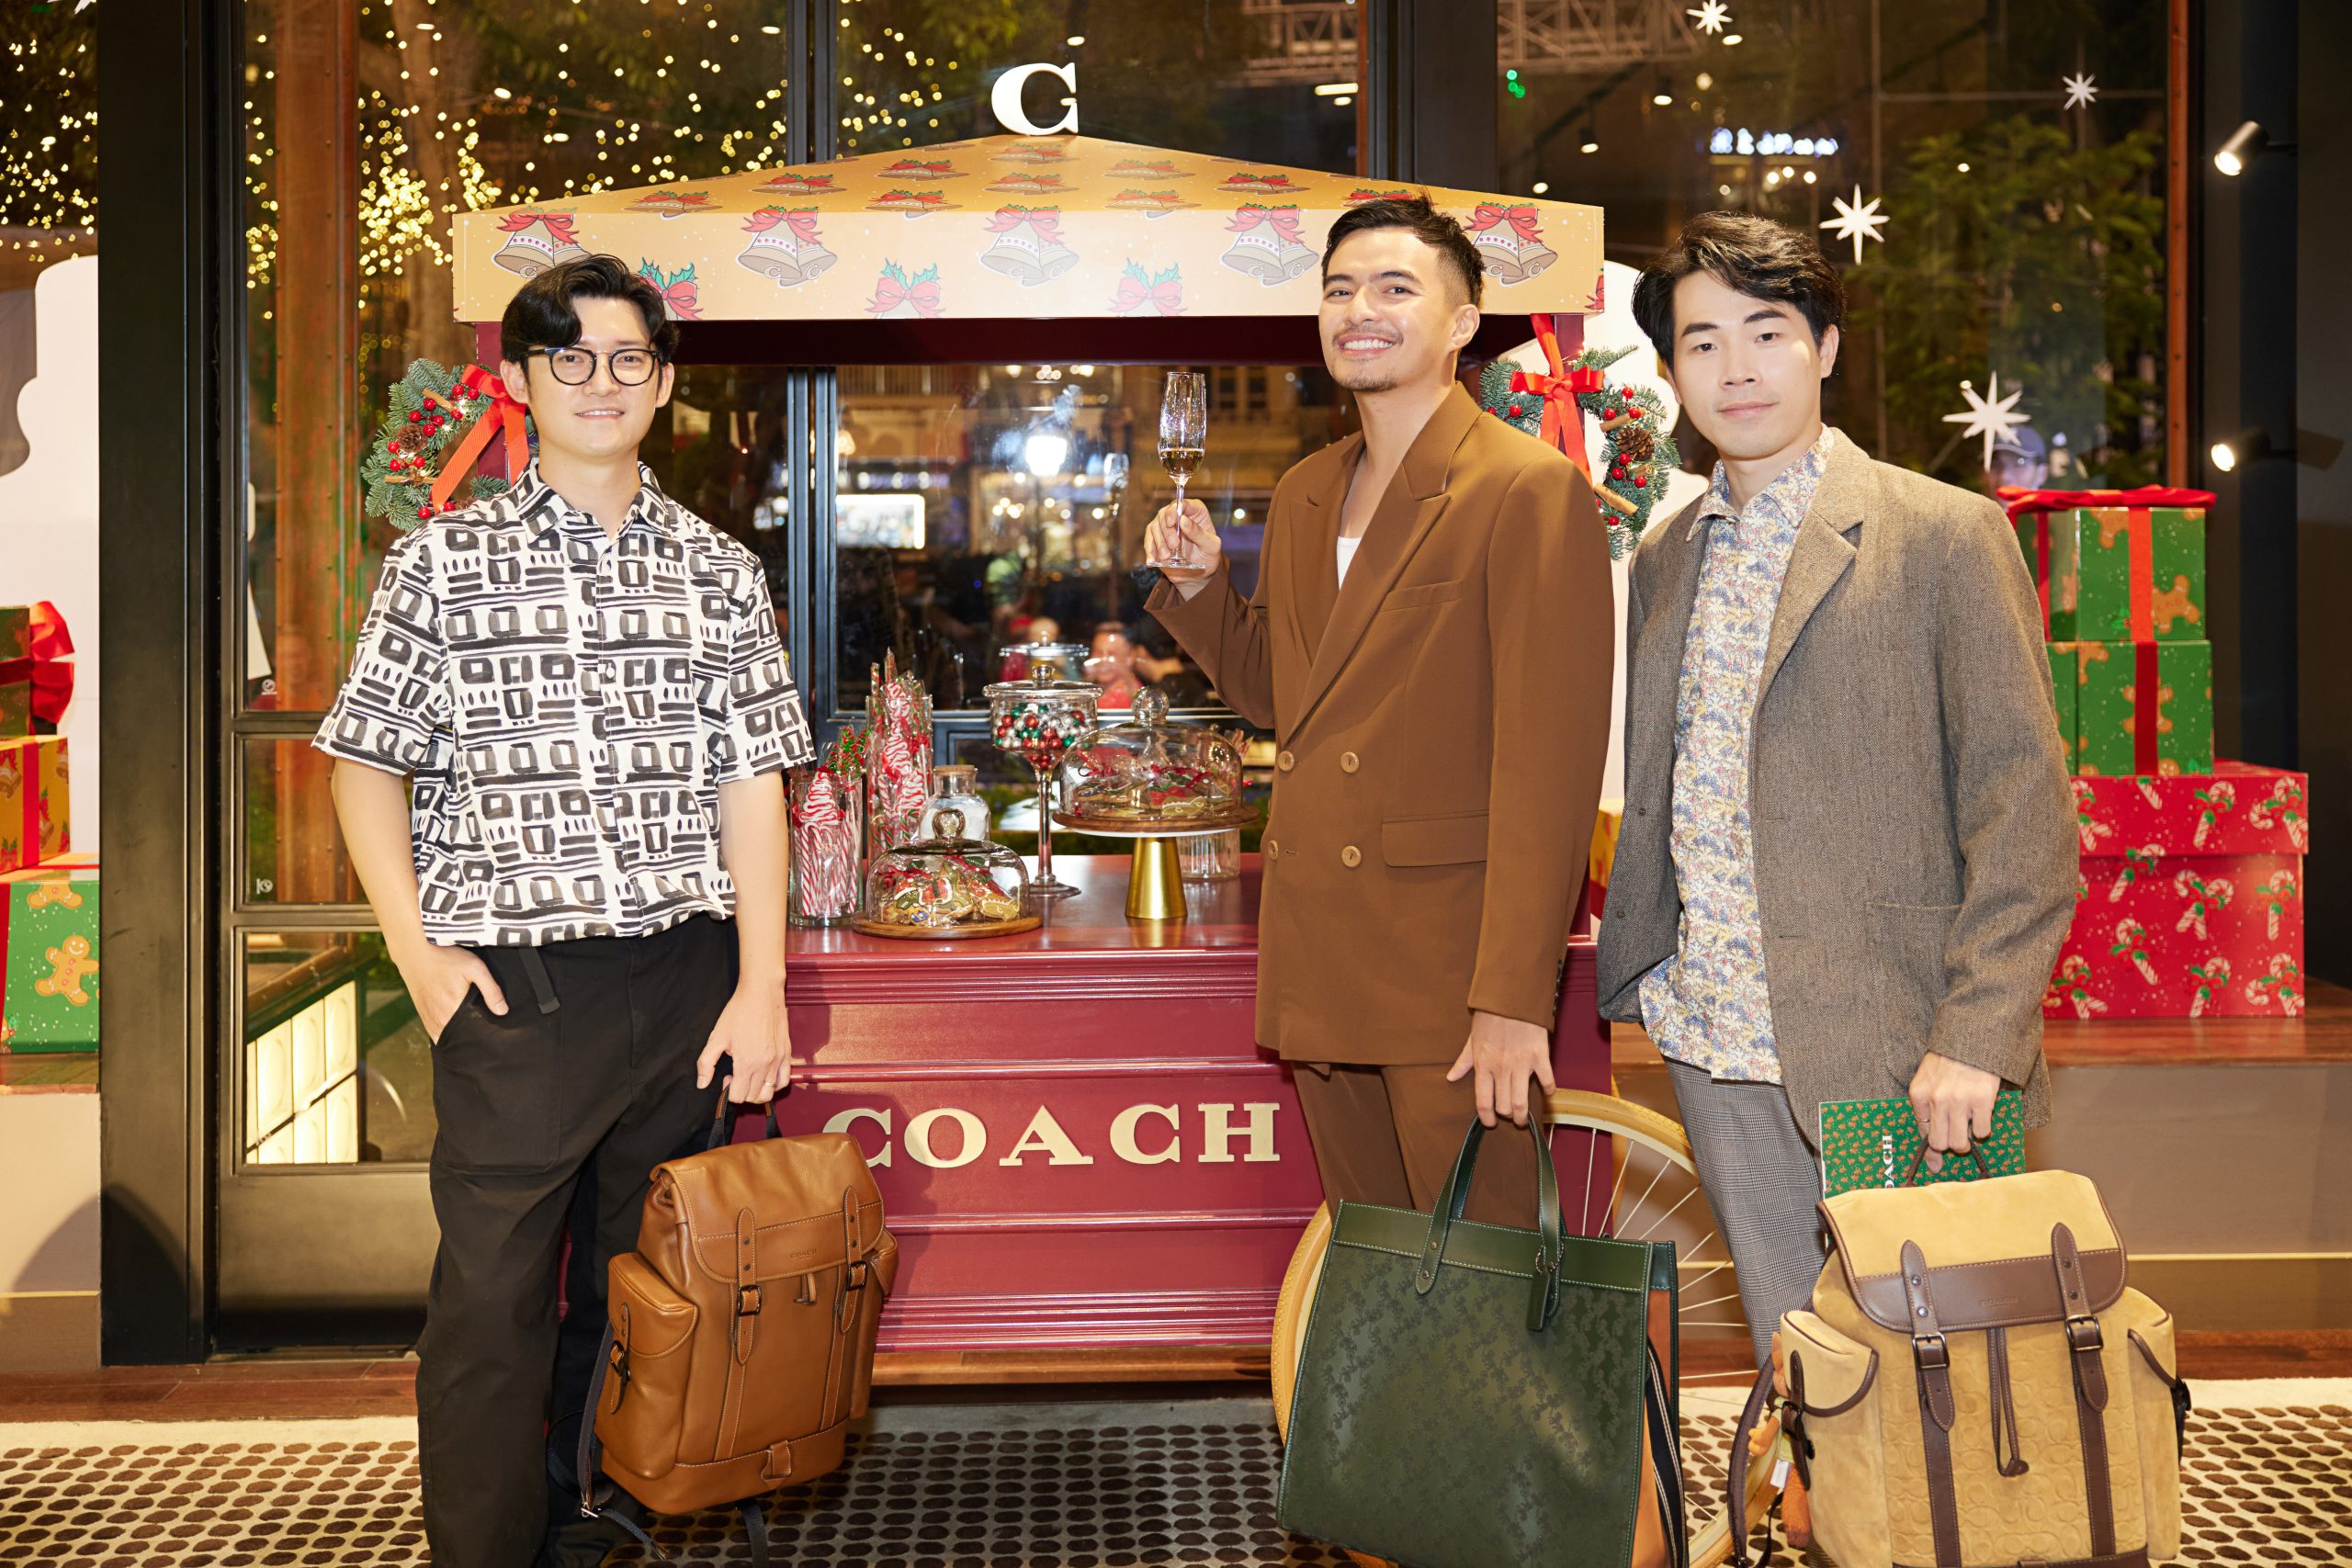 Travel bloggers Ly Thanh Co, Mike Nhan Phan and Phan The Anh check-in with the Wonder Sweet candy car at the Christmas party with Coach